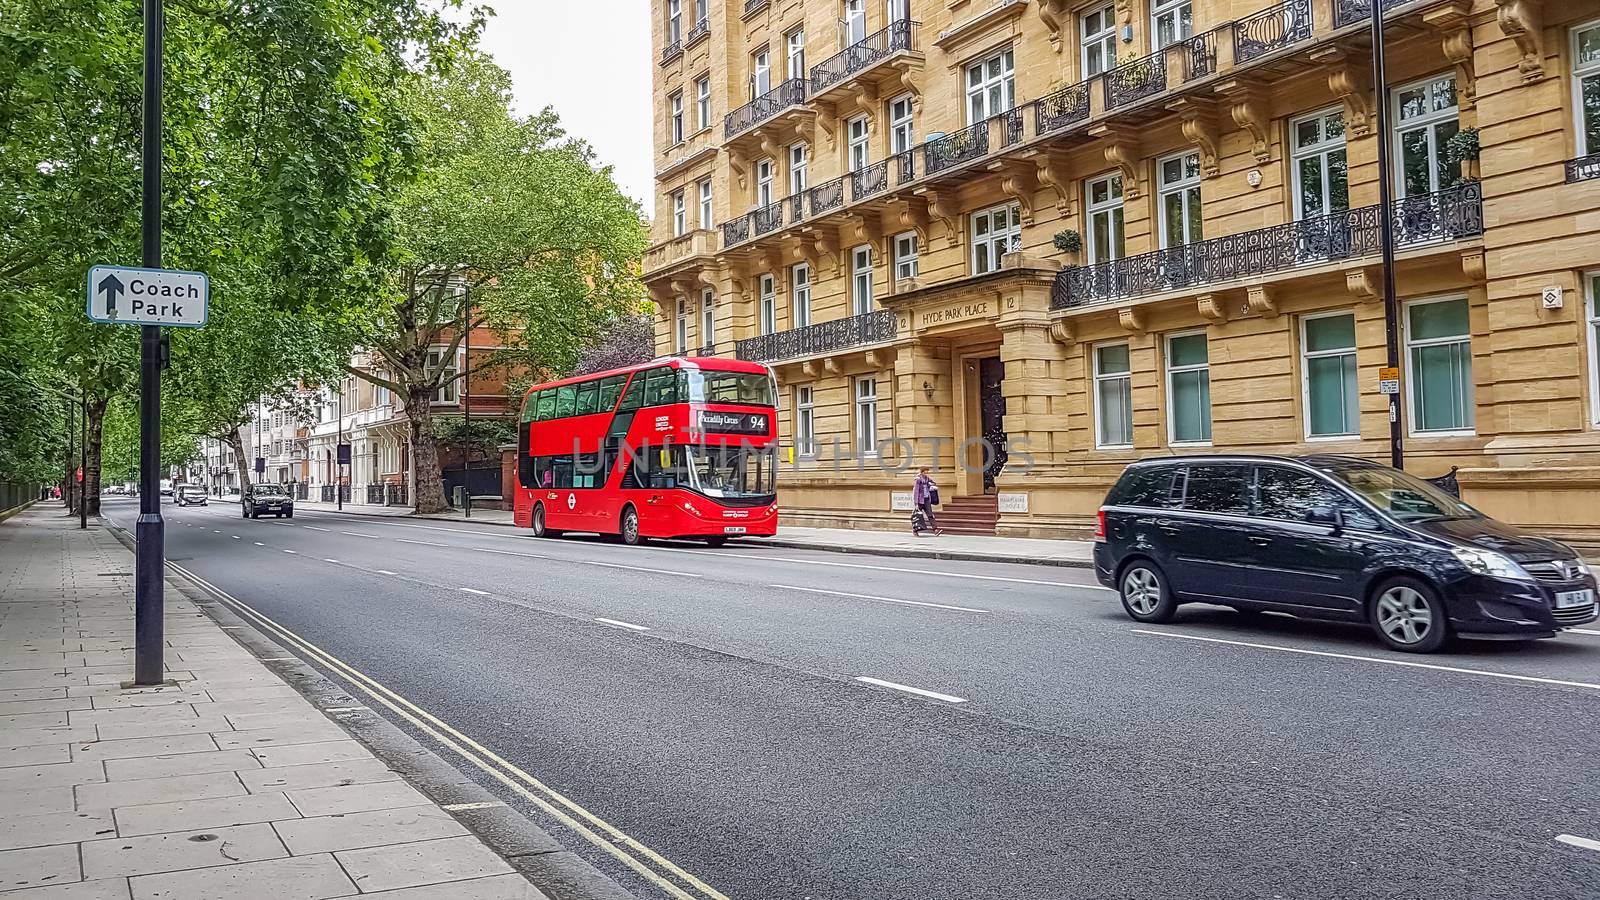 London, UK - July 8, 2020: Modern red double-decker bus passing by Hyde Park Place building in central London. It says on it - Piccadilly Circus 94.